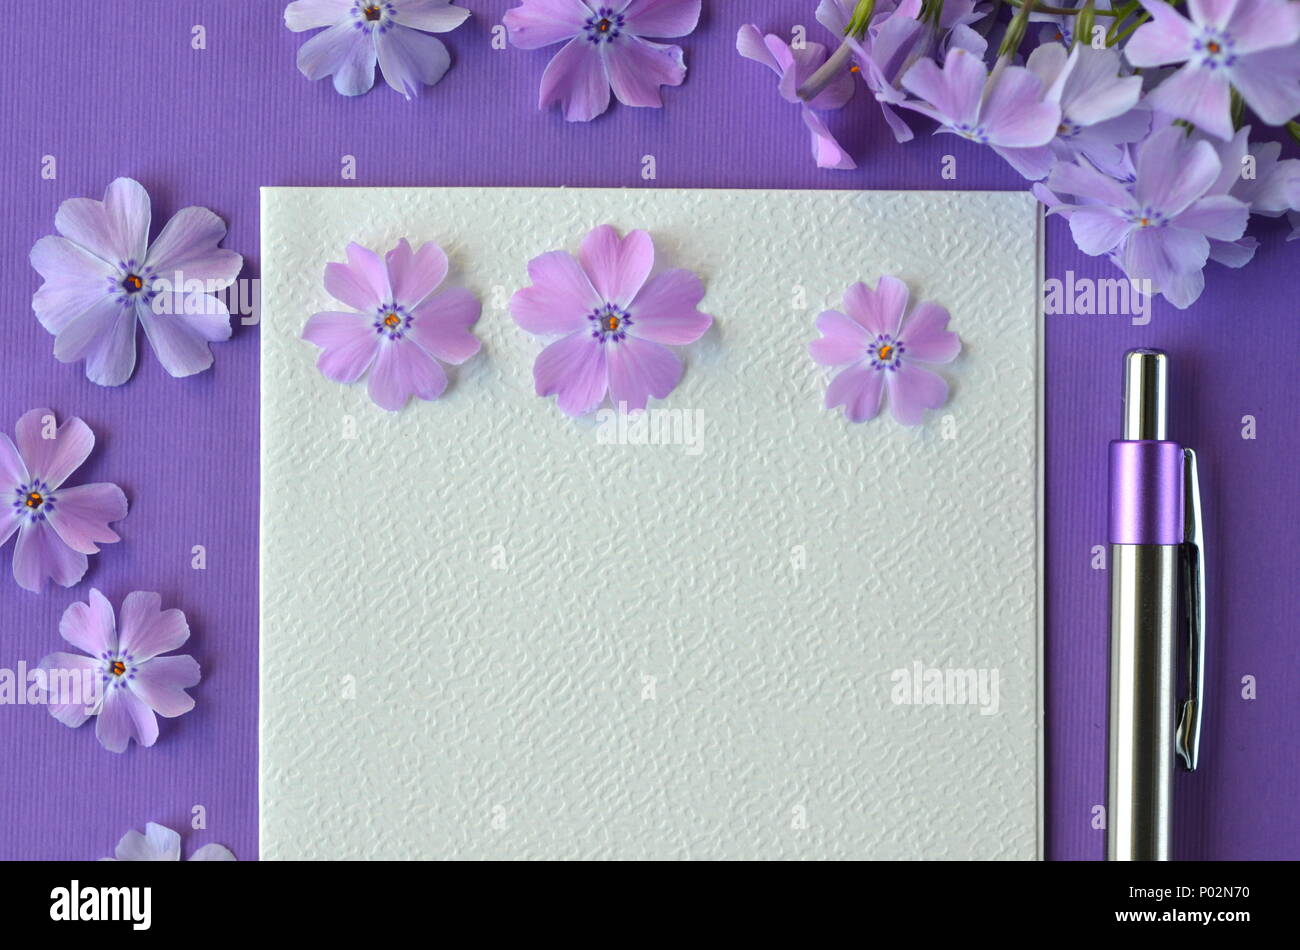 Ultra violet flatlay of feminine stationery, notebook, pen, lavender phlox flowers with copy space. Brainstorming ideas, note taking or diary writing Stock Photo